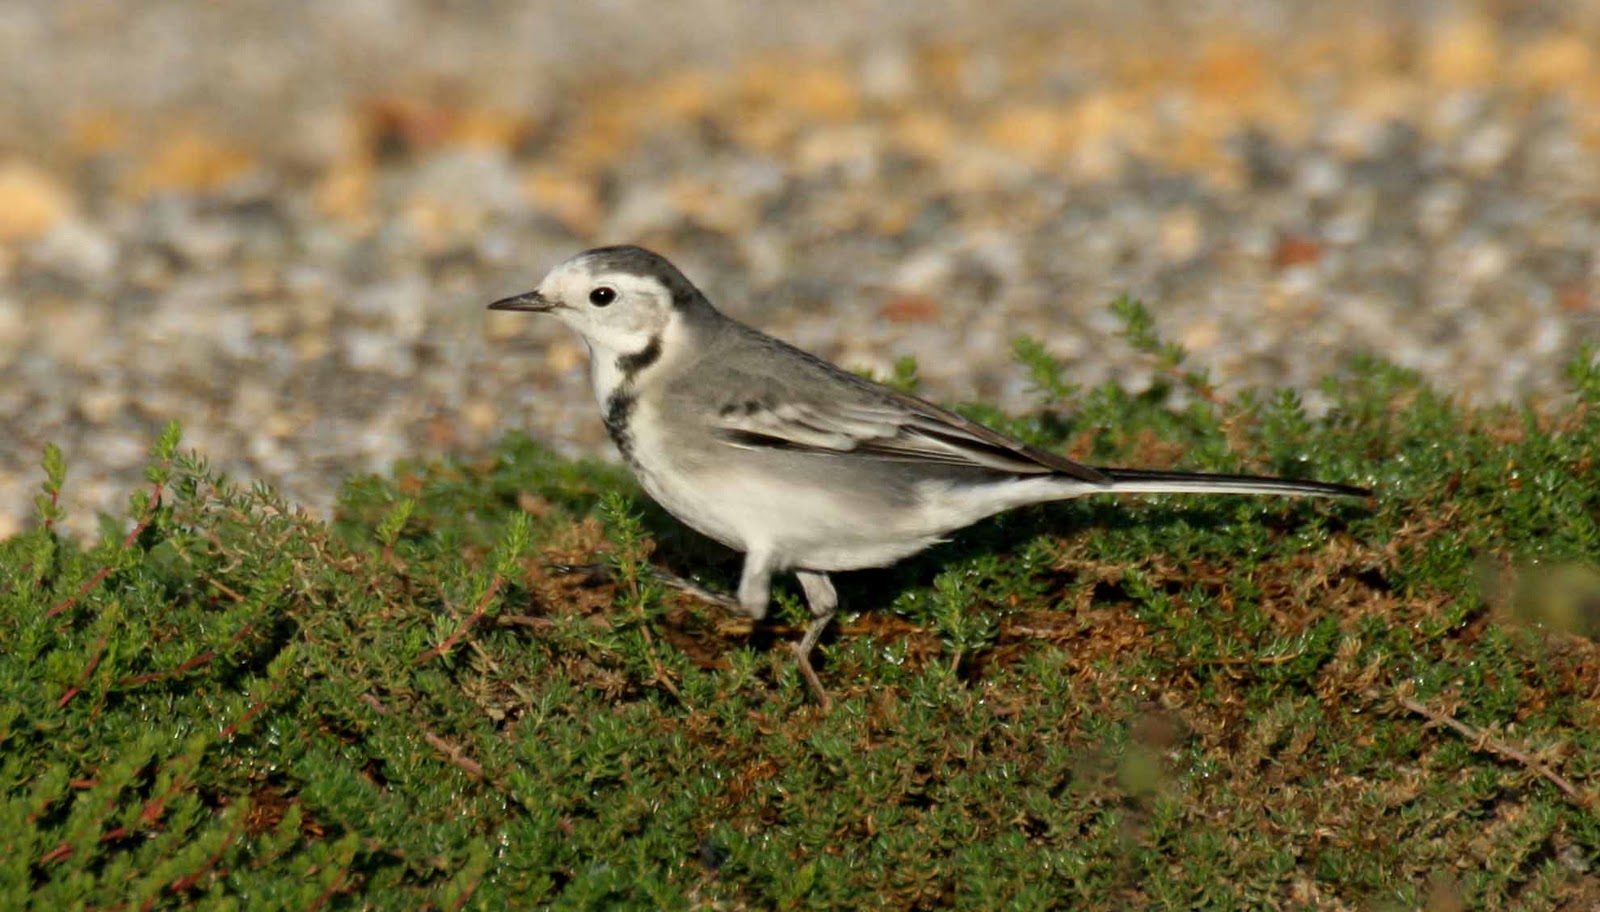 Western Andalucia Birding: White / Pied Wagtail